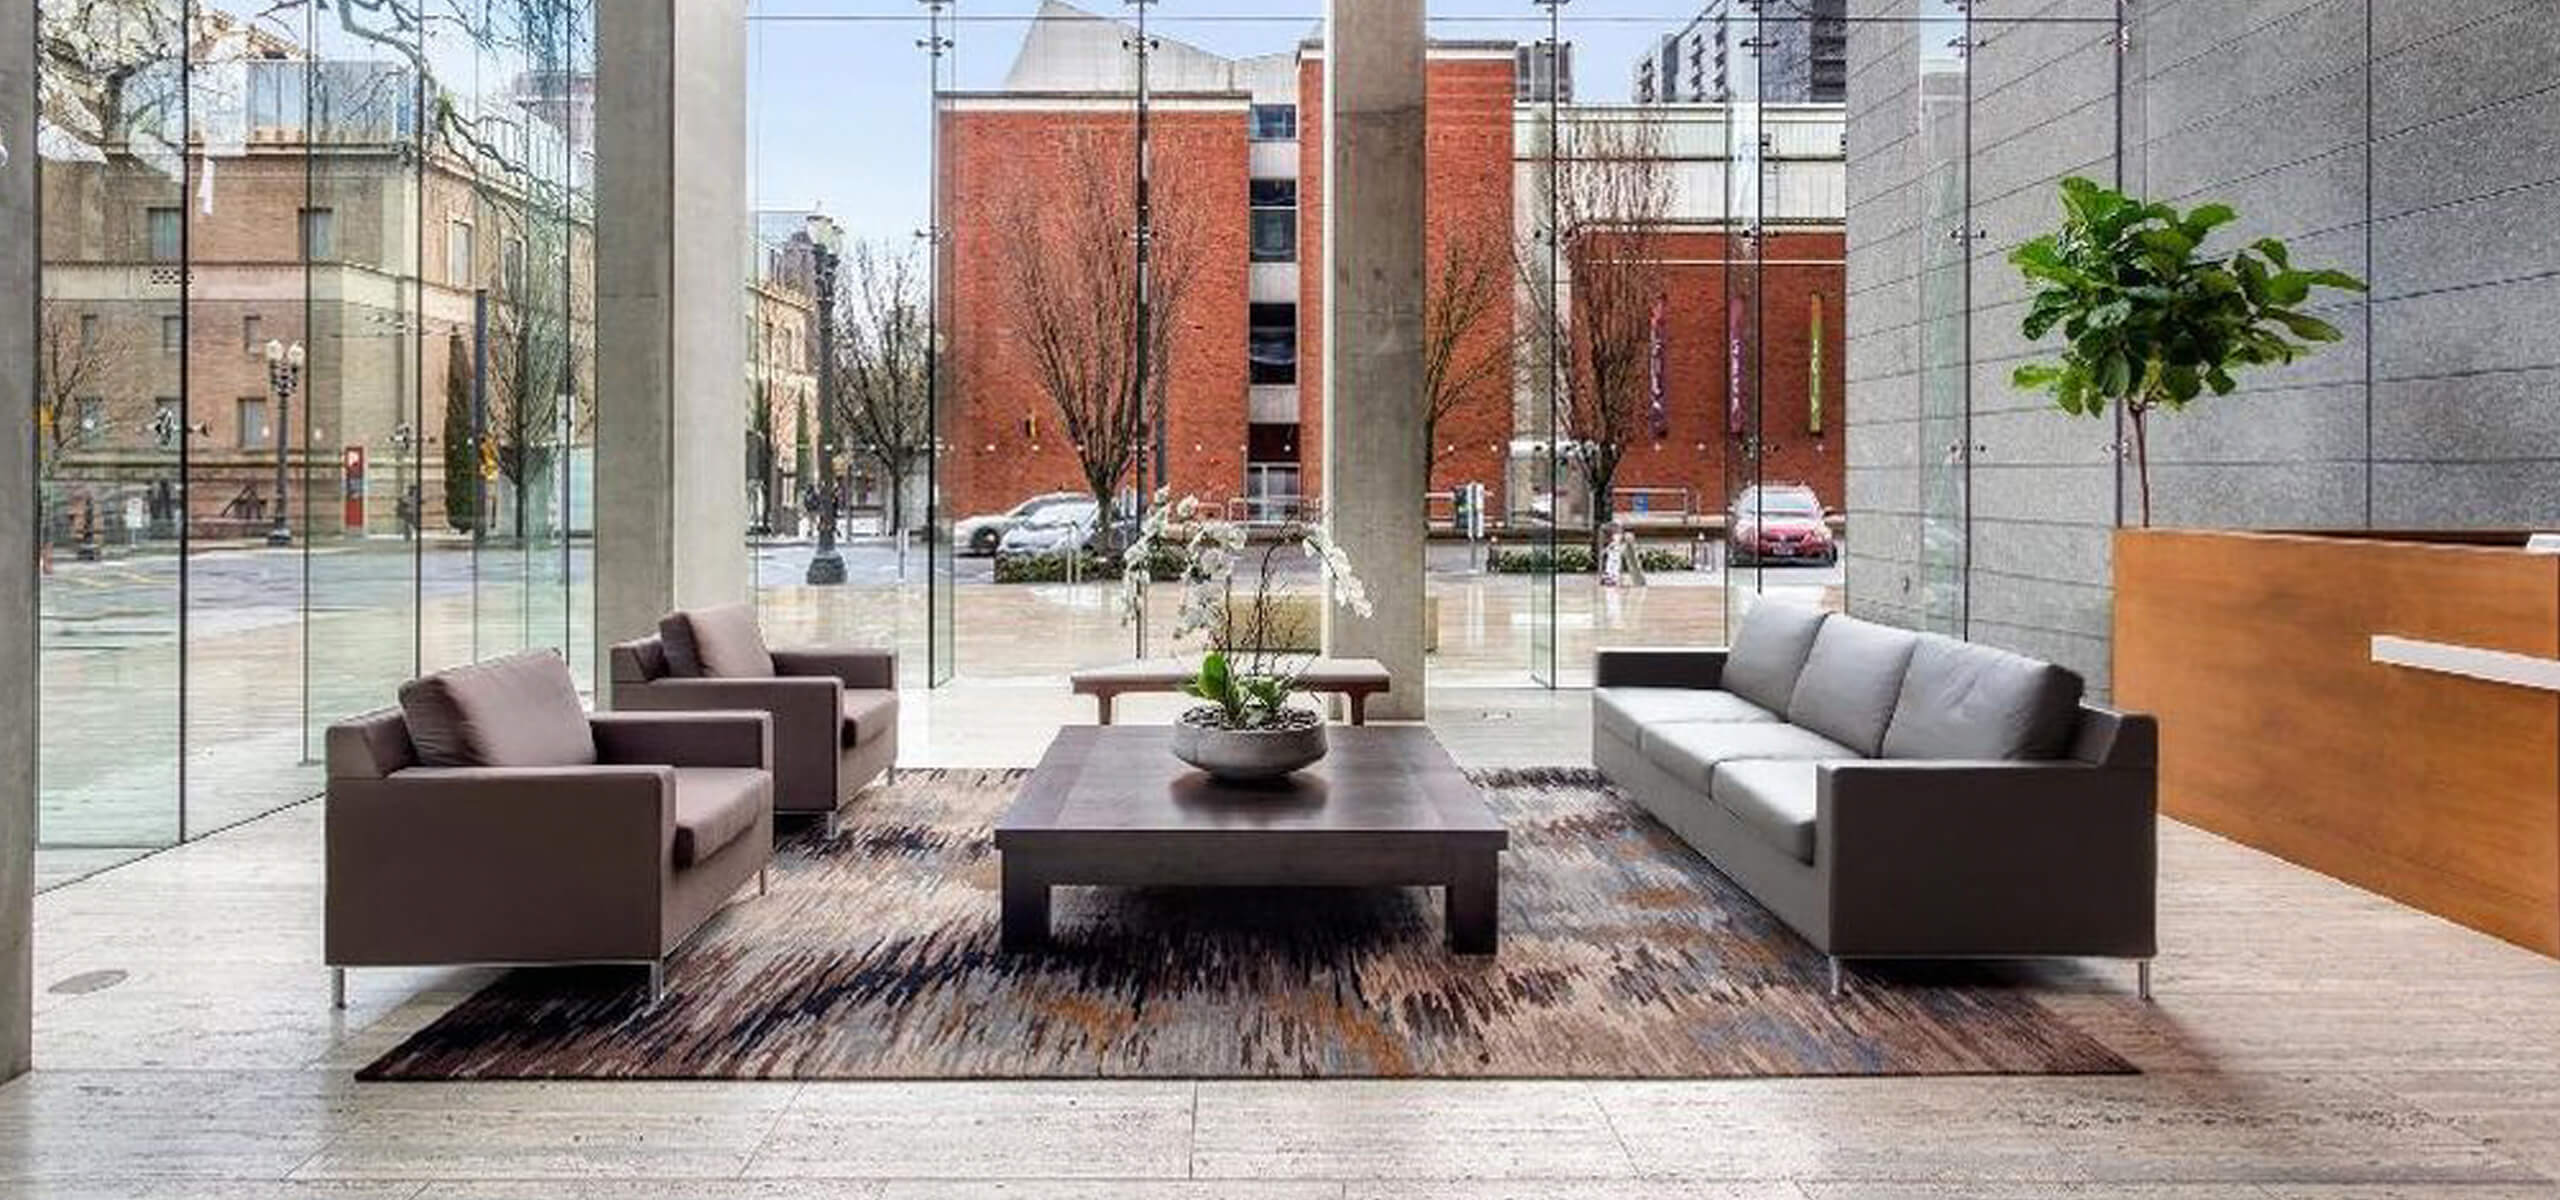 Tufenkian rugs can be ideal for public spaces